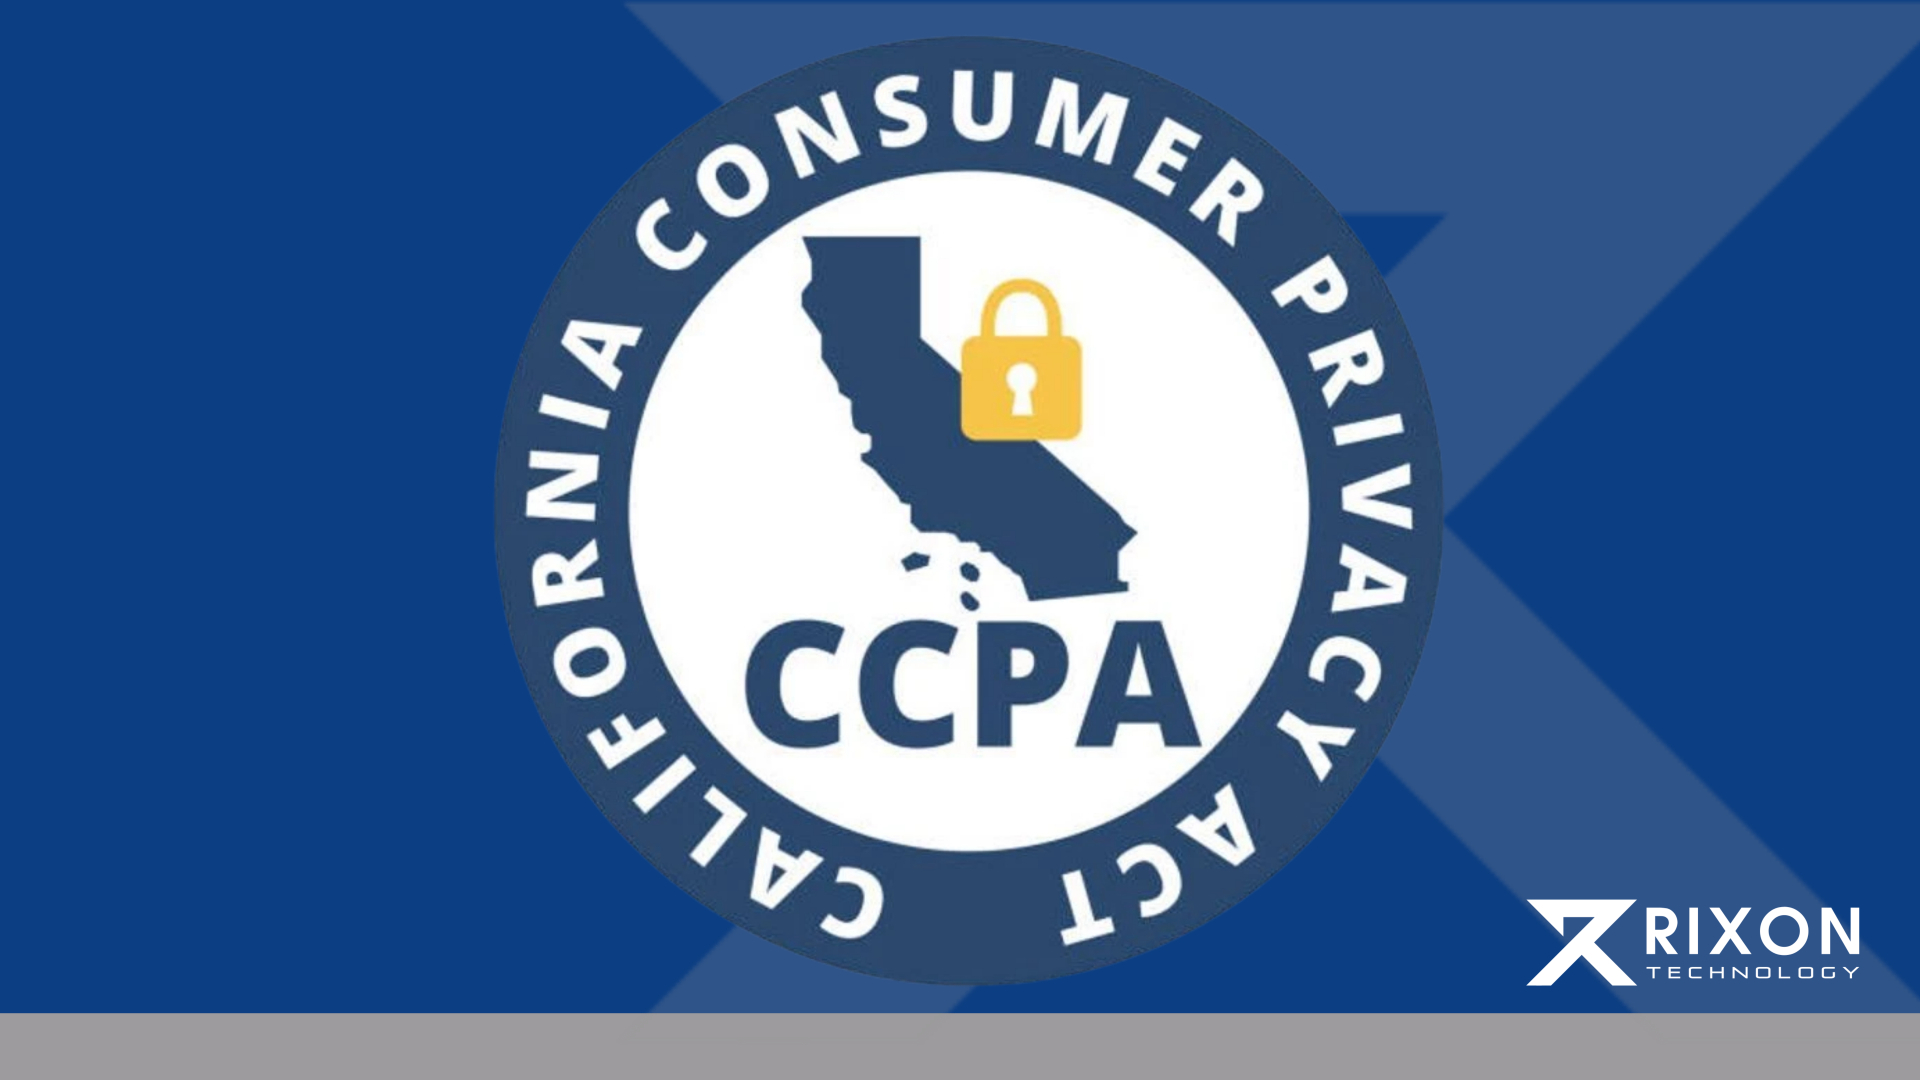 California Consumer Privacy Act (CCPA) emblem featuring the silhouette of California state with a padlock symbol, against a blue background. The text 'Rixon Technology' is positioned in the lower right.